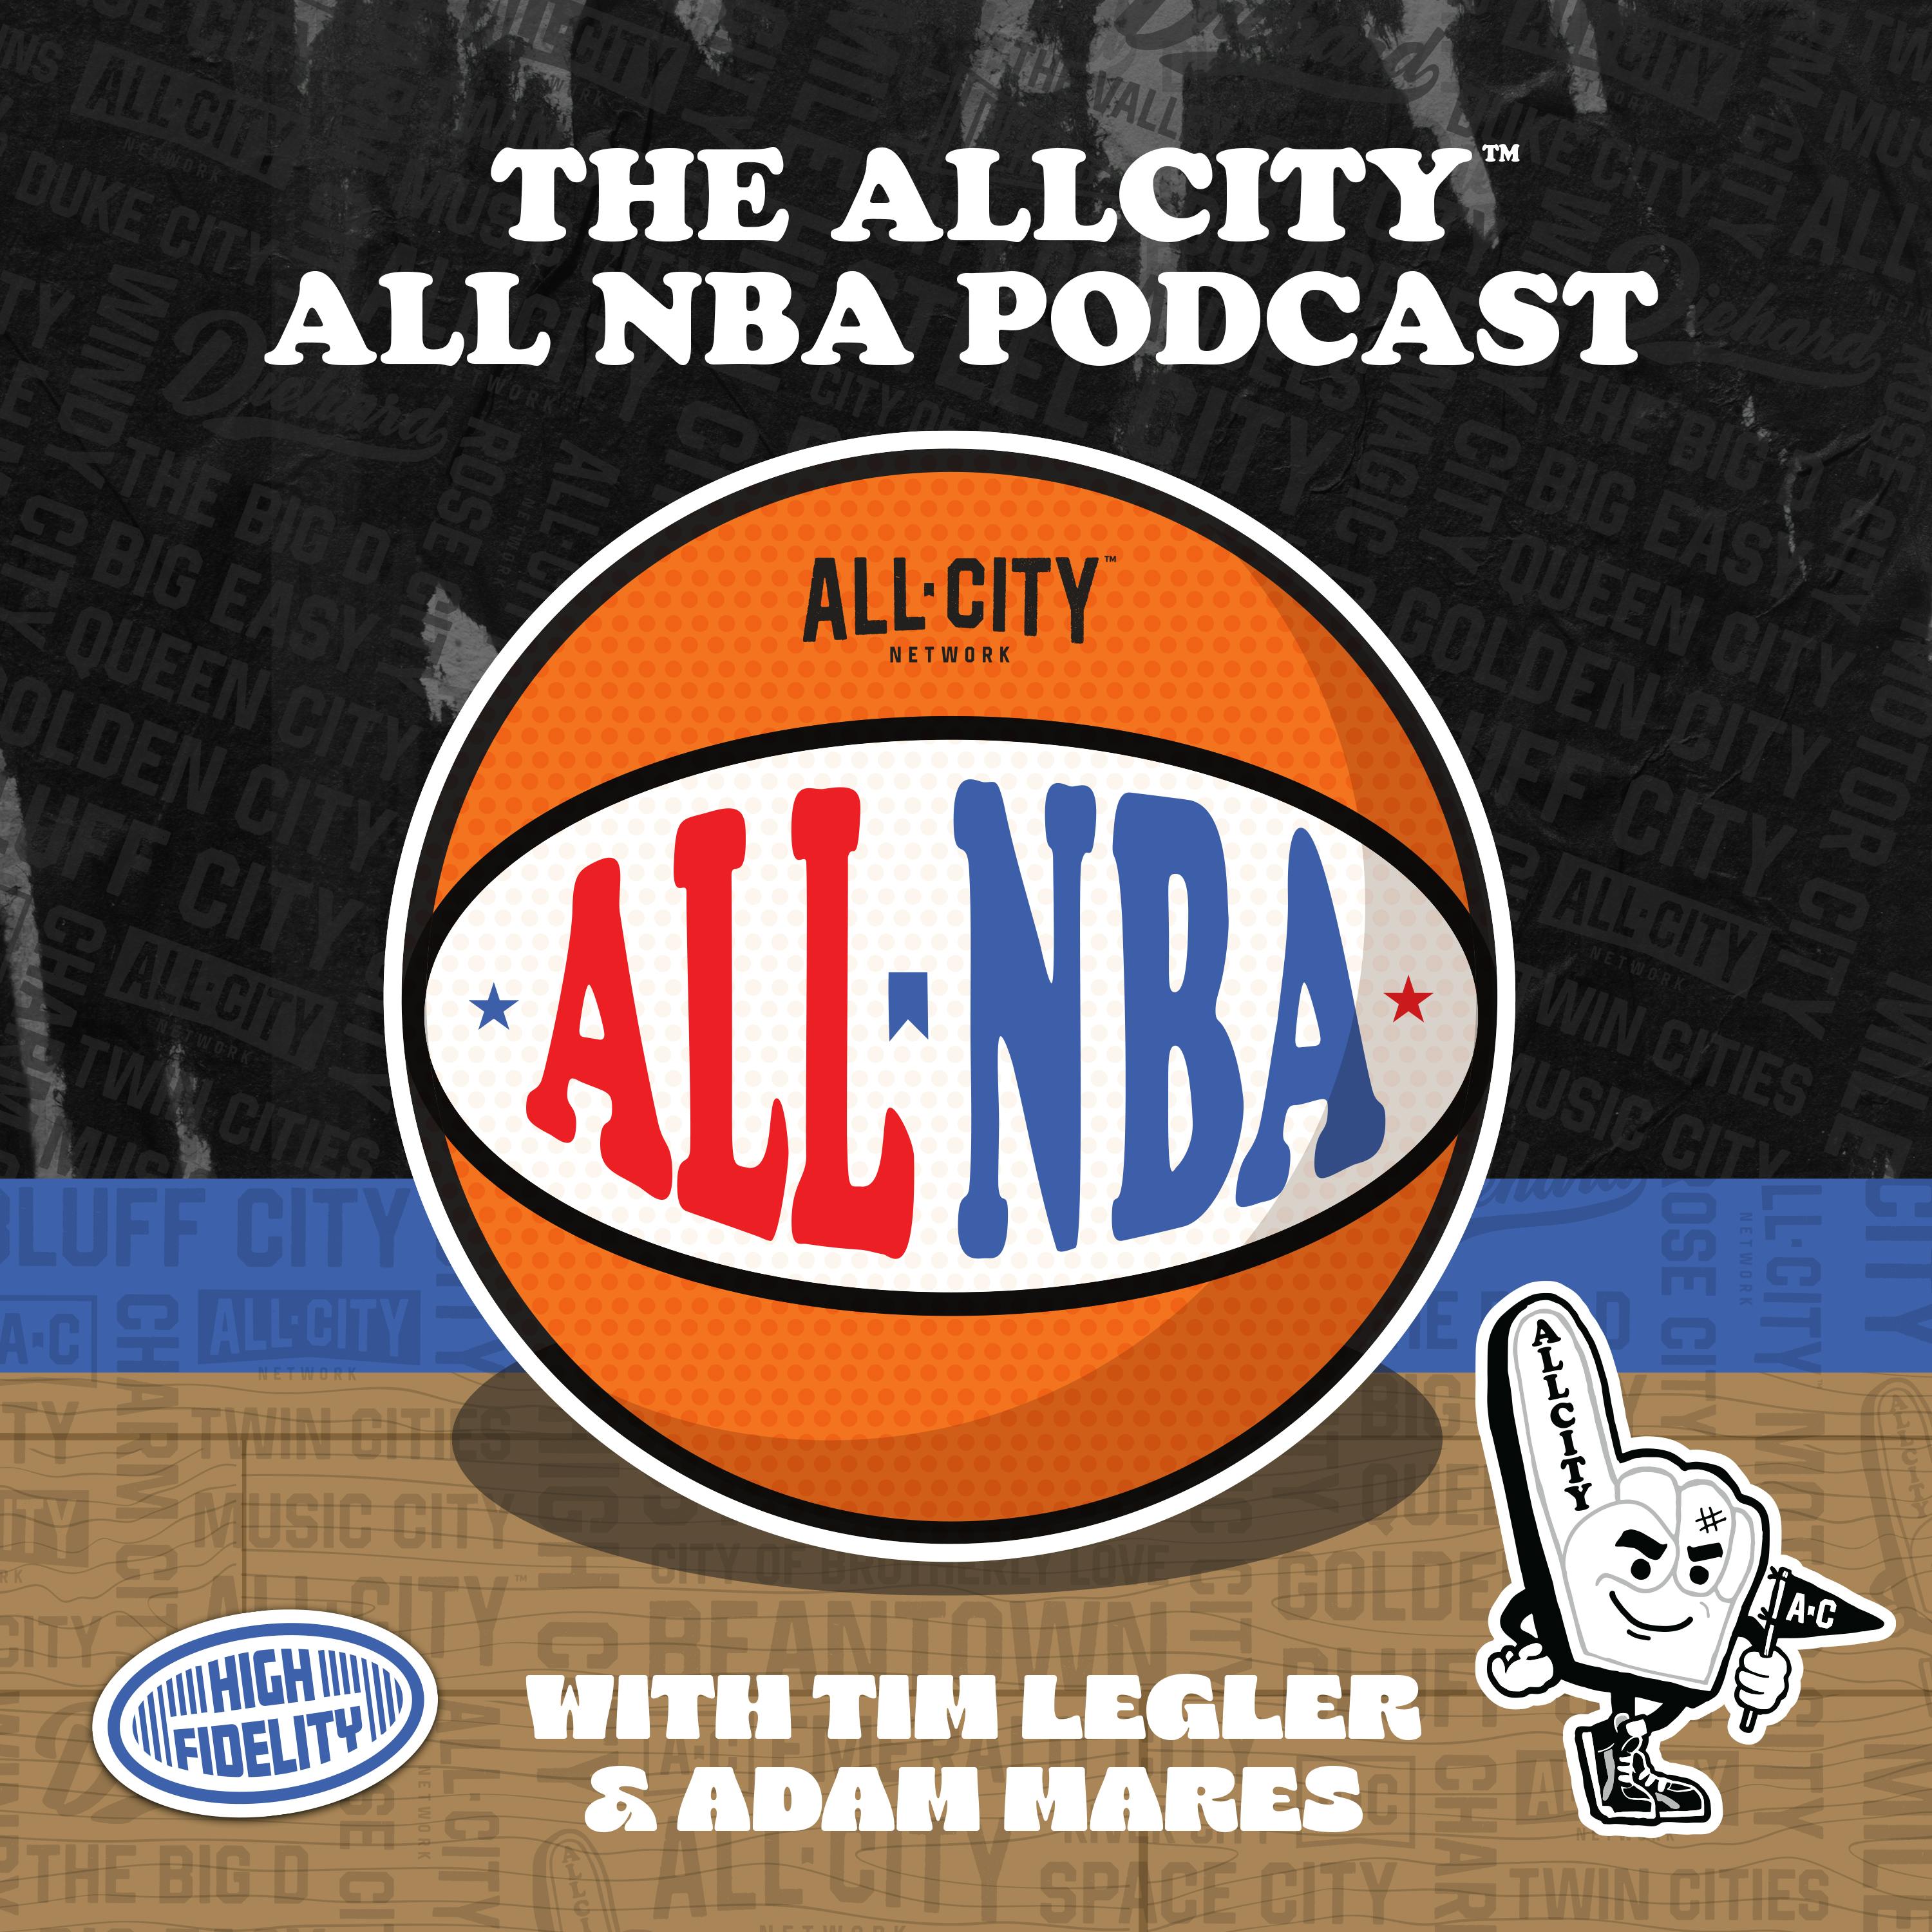 The ALL NBA Podcast: Are the New York Knicks the biggest threat to the Celtics in the East?